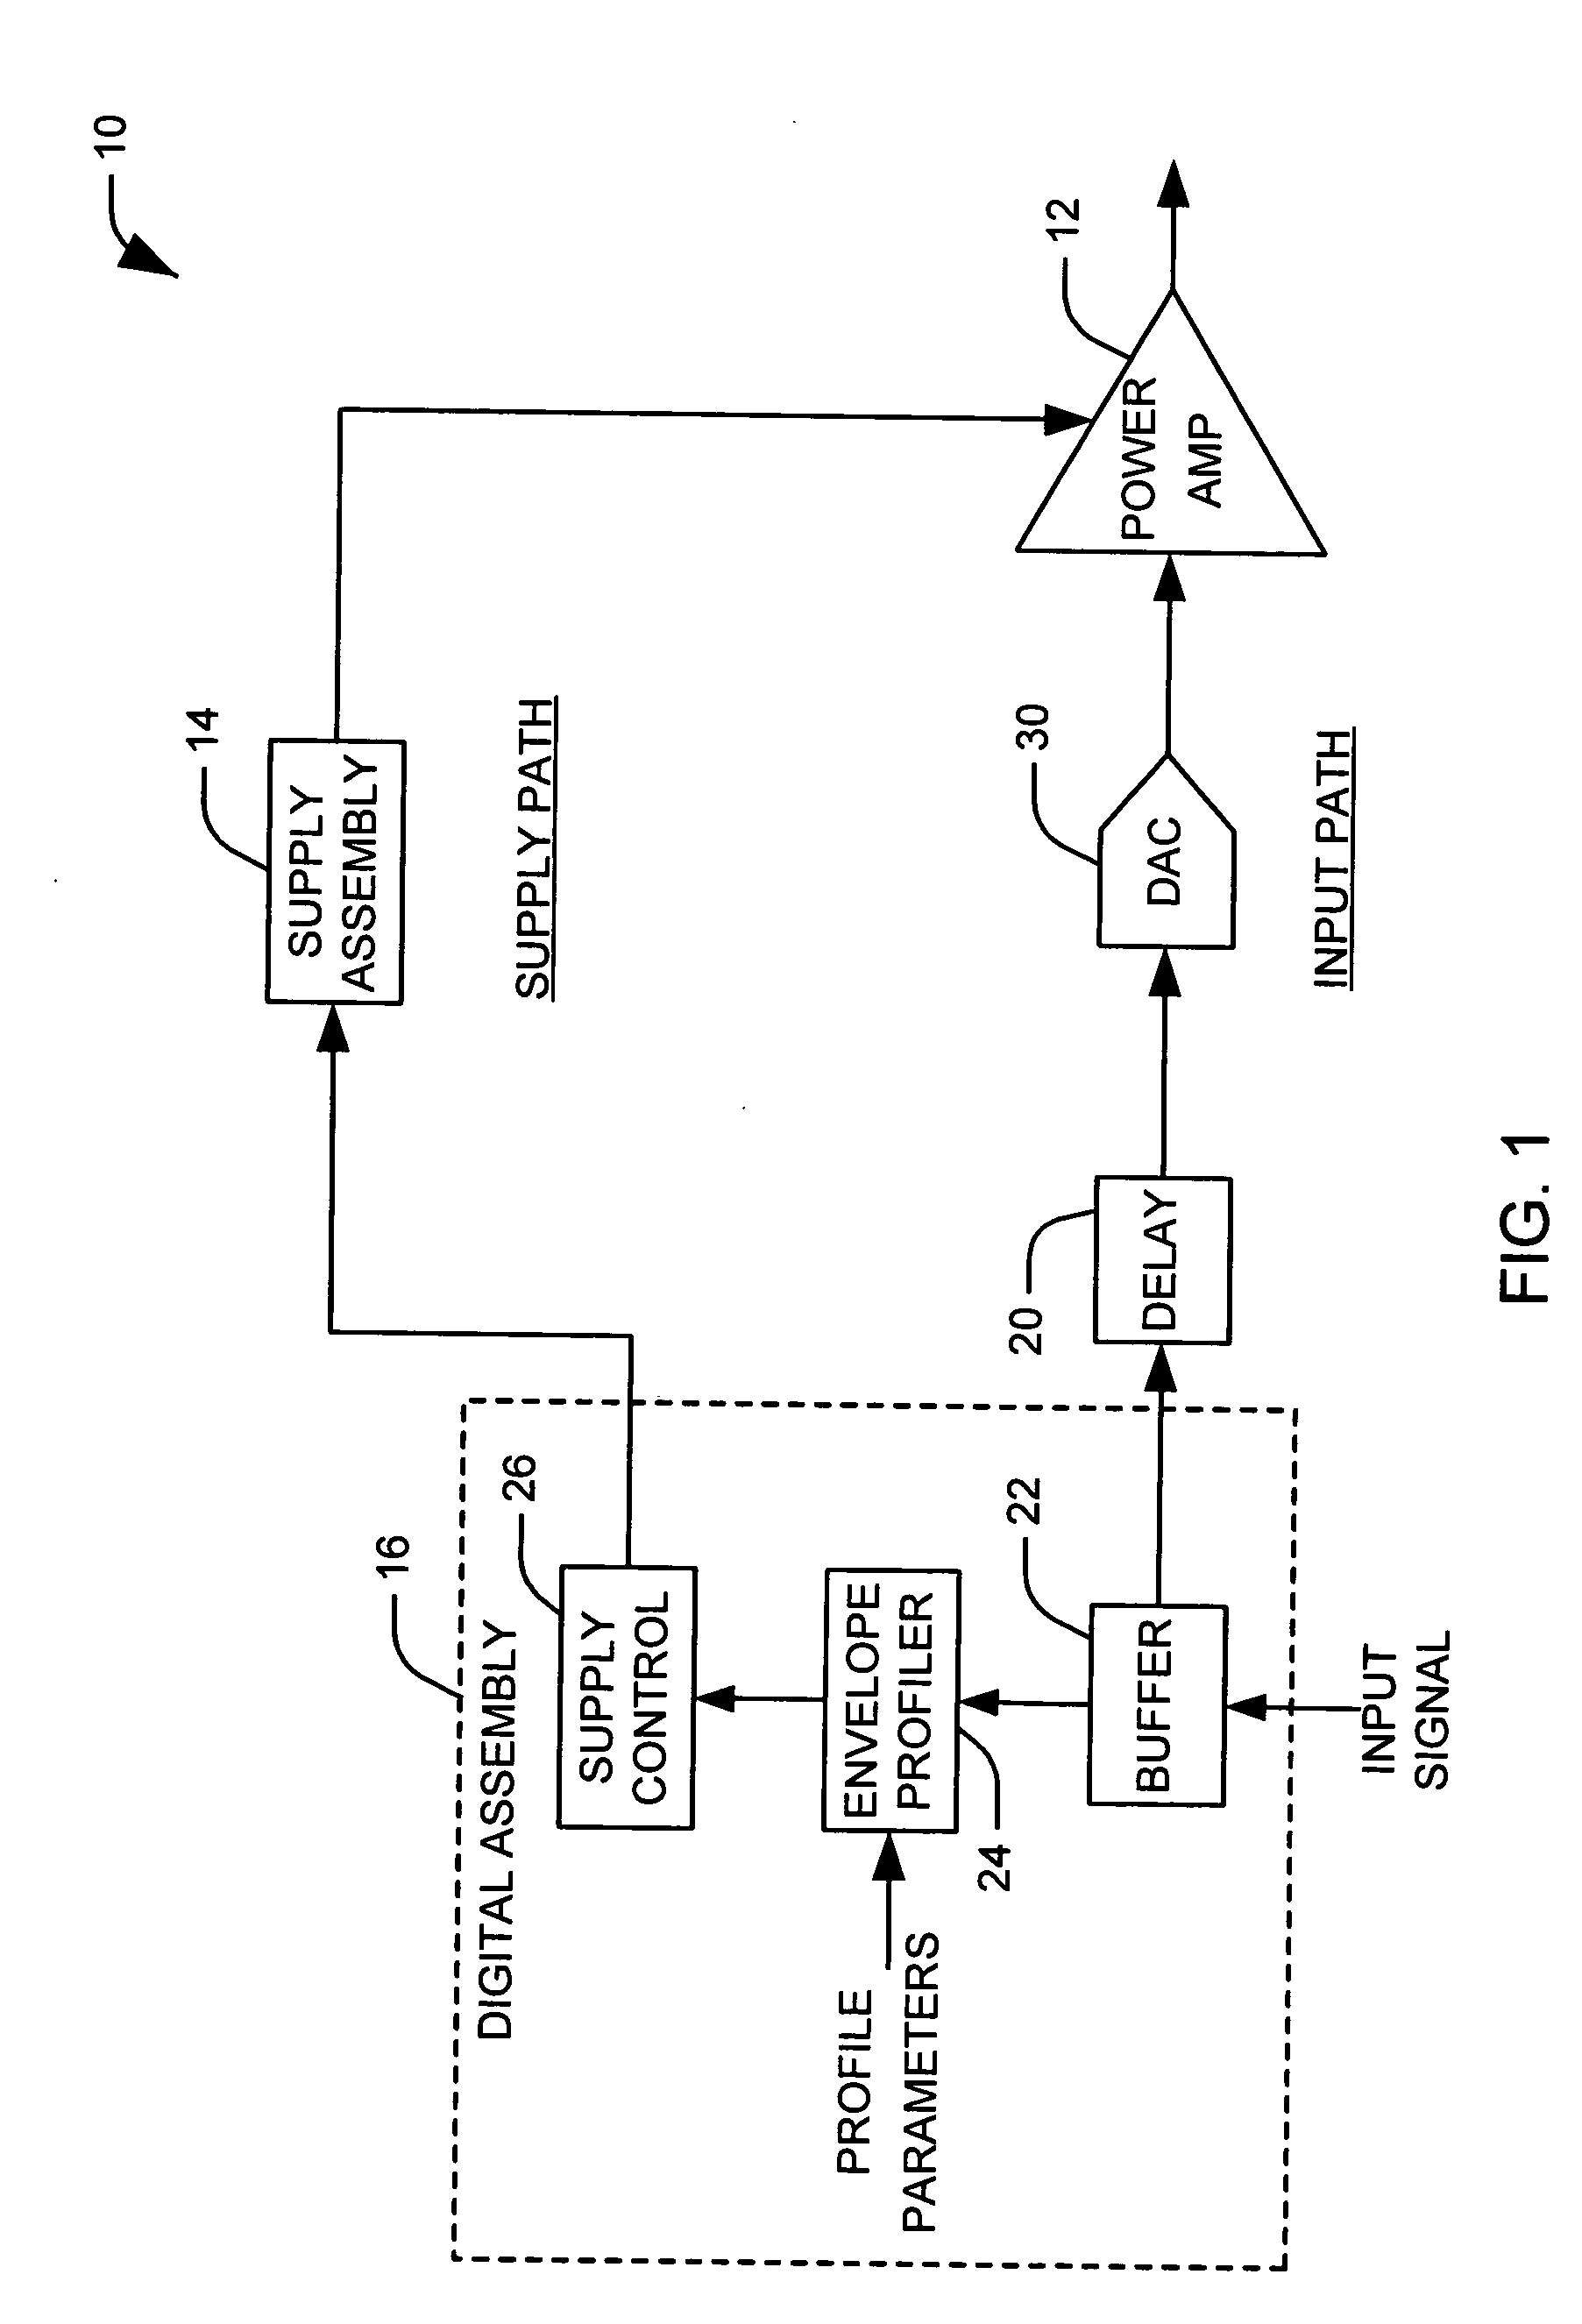 Variable supply amplifier system